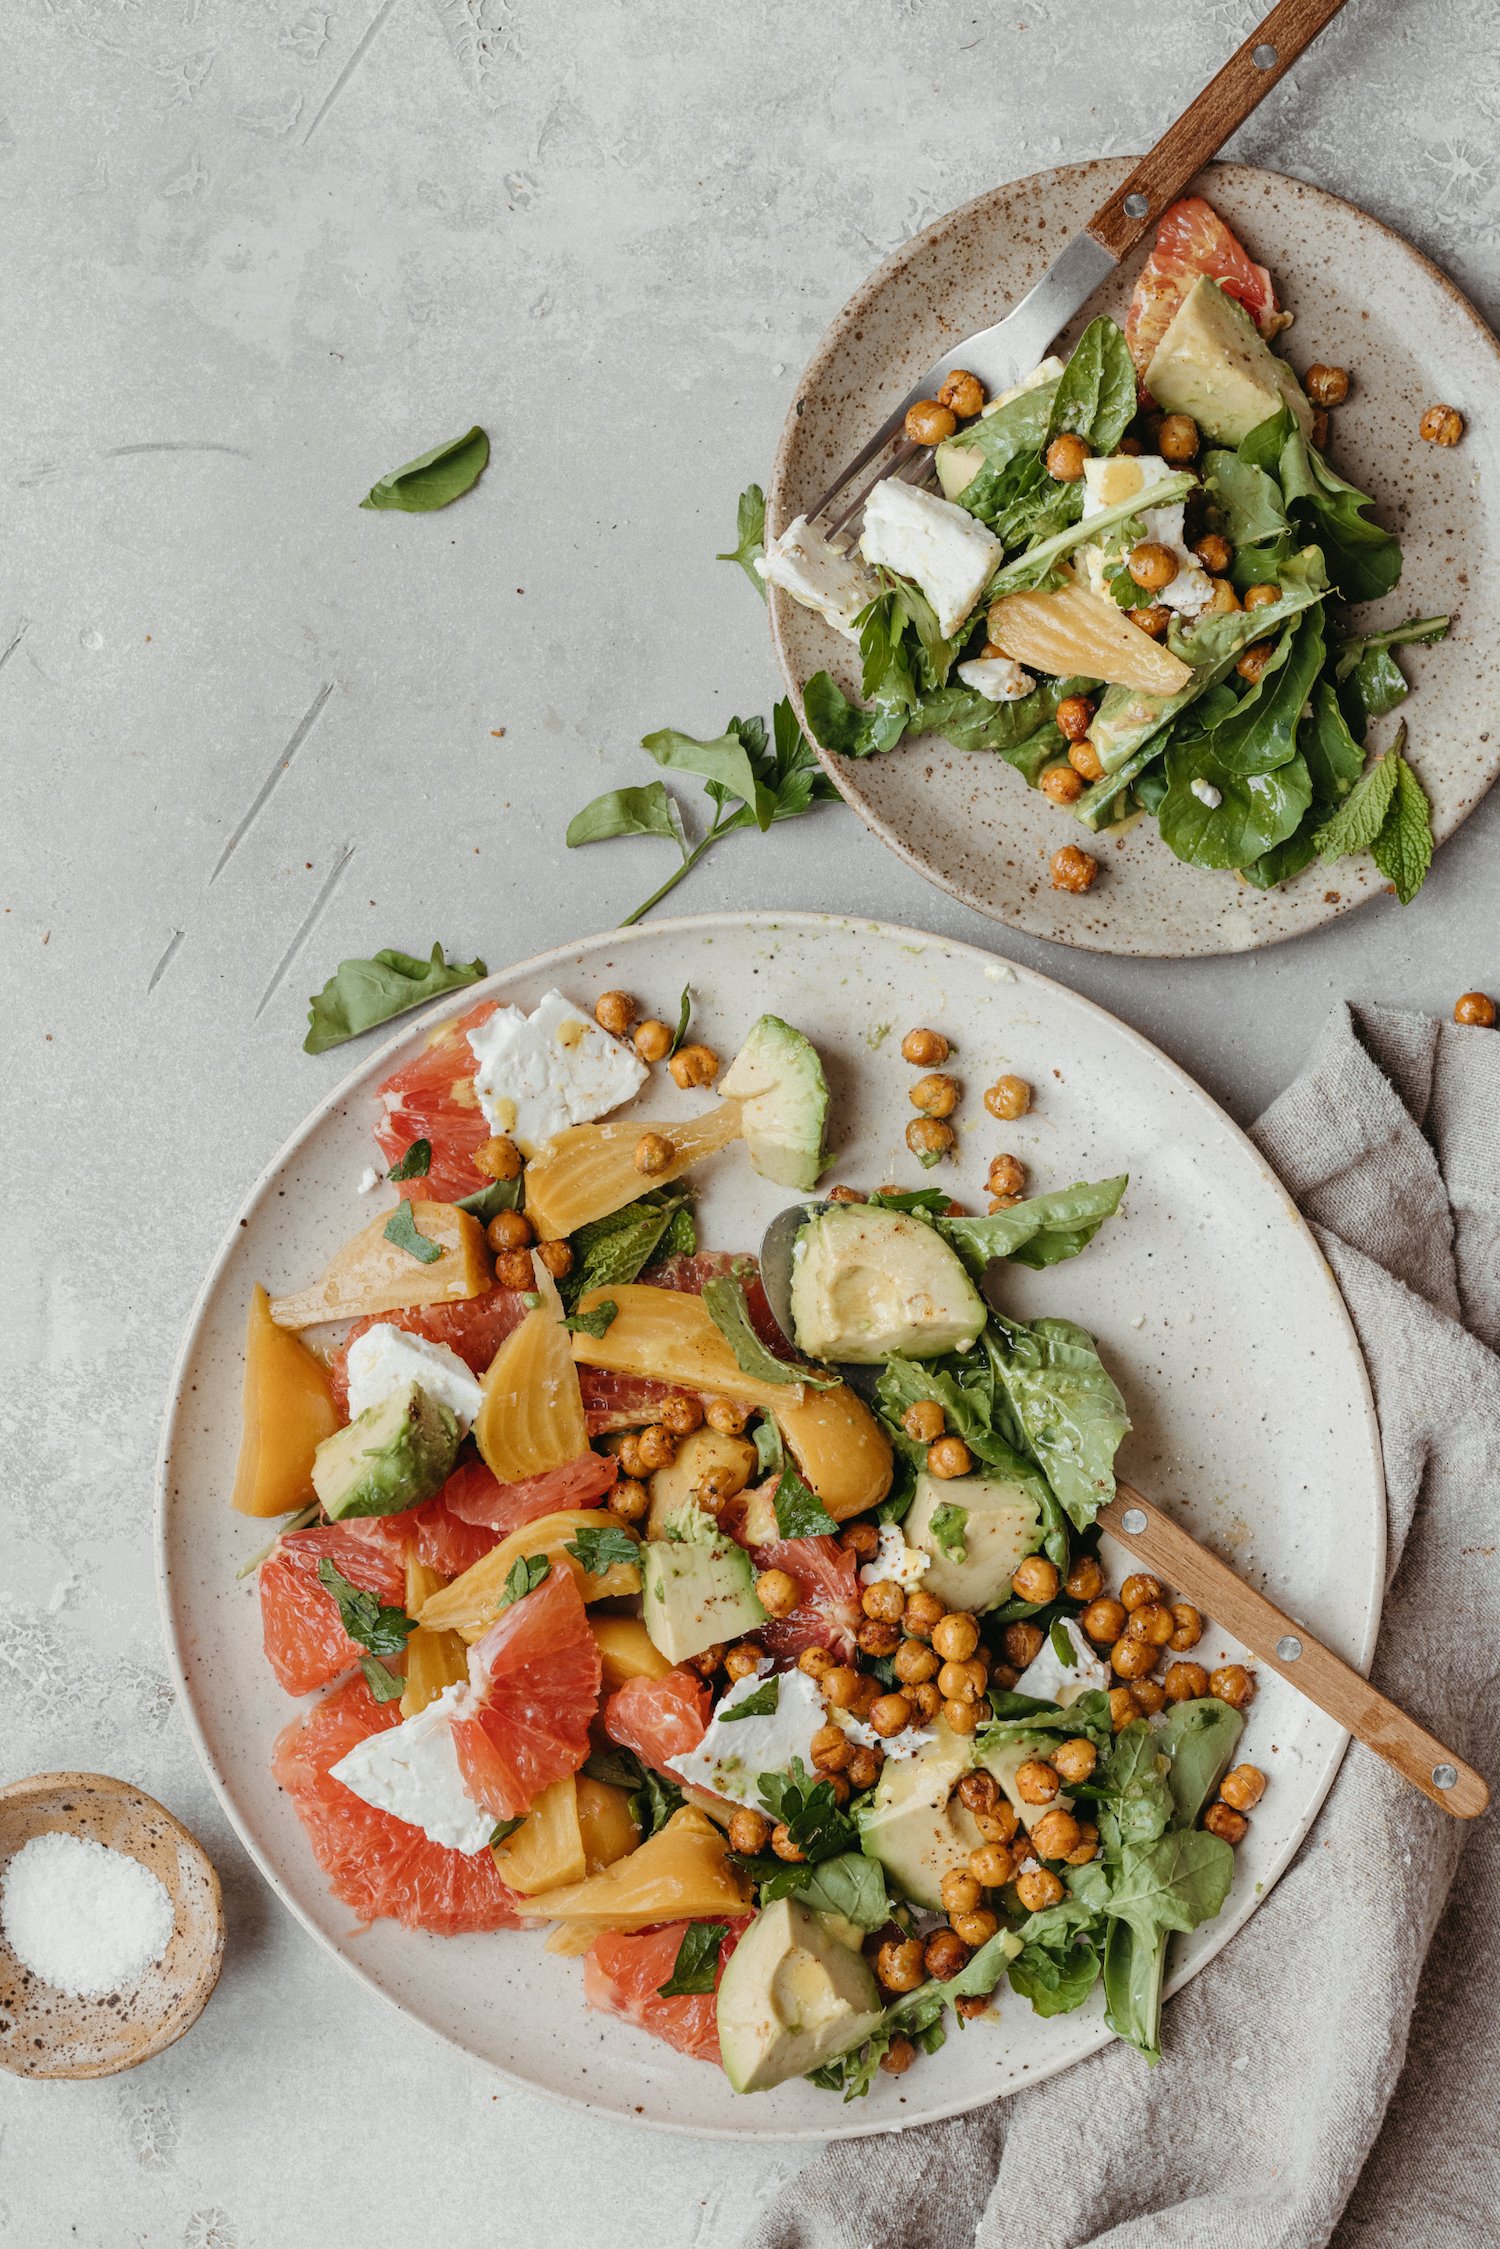 grapefruit avocado salad with golden beets, crispy chickpeas, and feta - easy healthy lunch